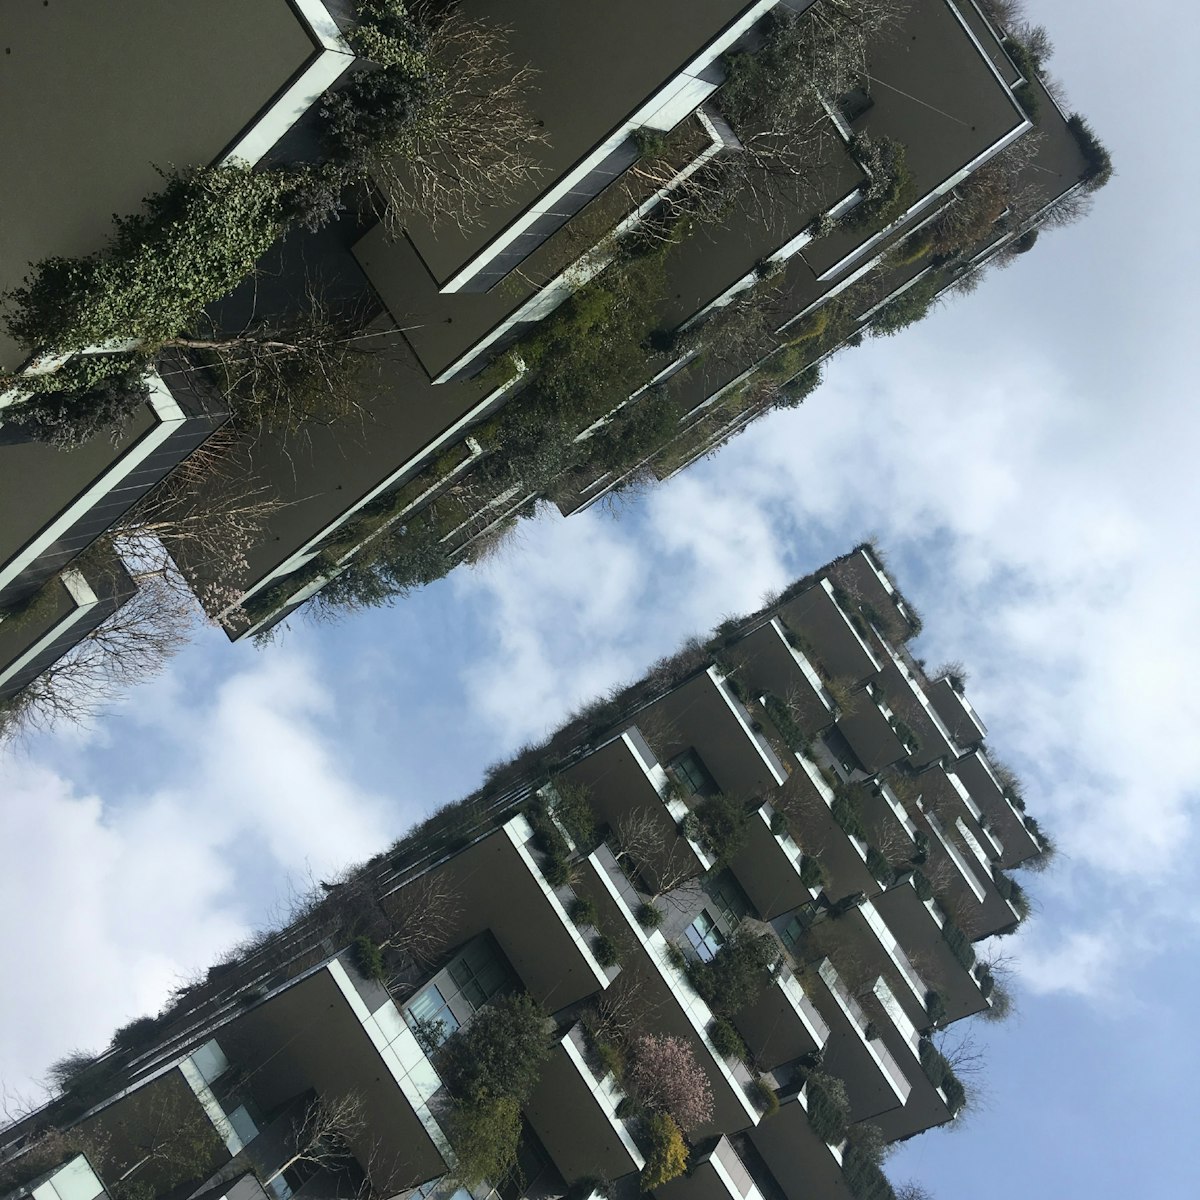 Bosco Verticale towering up to the sky